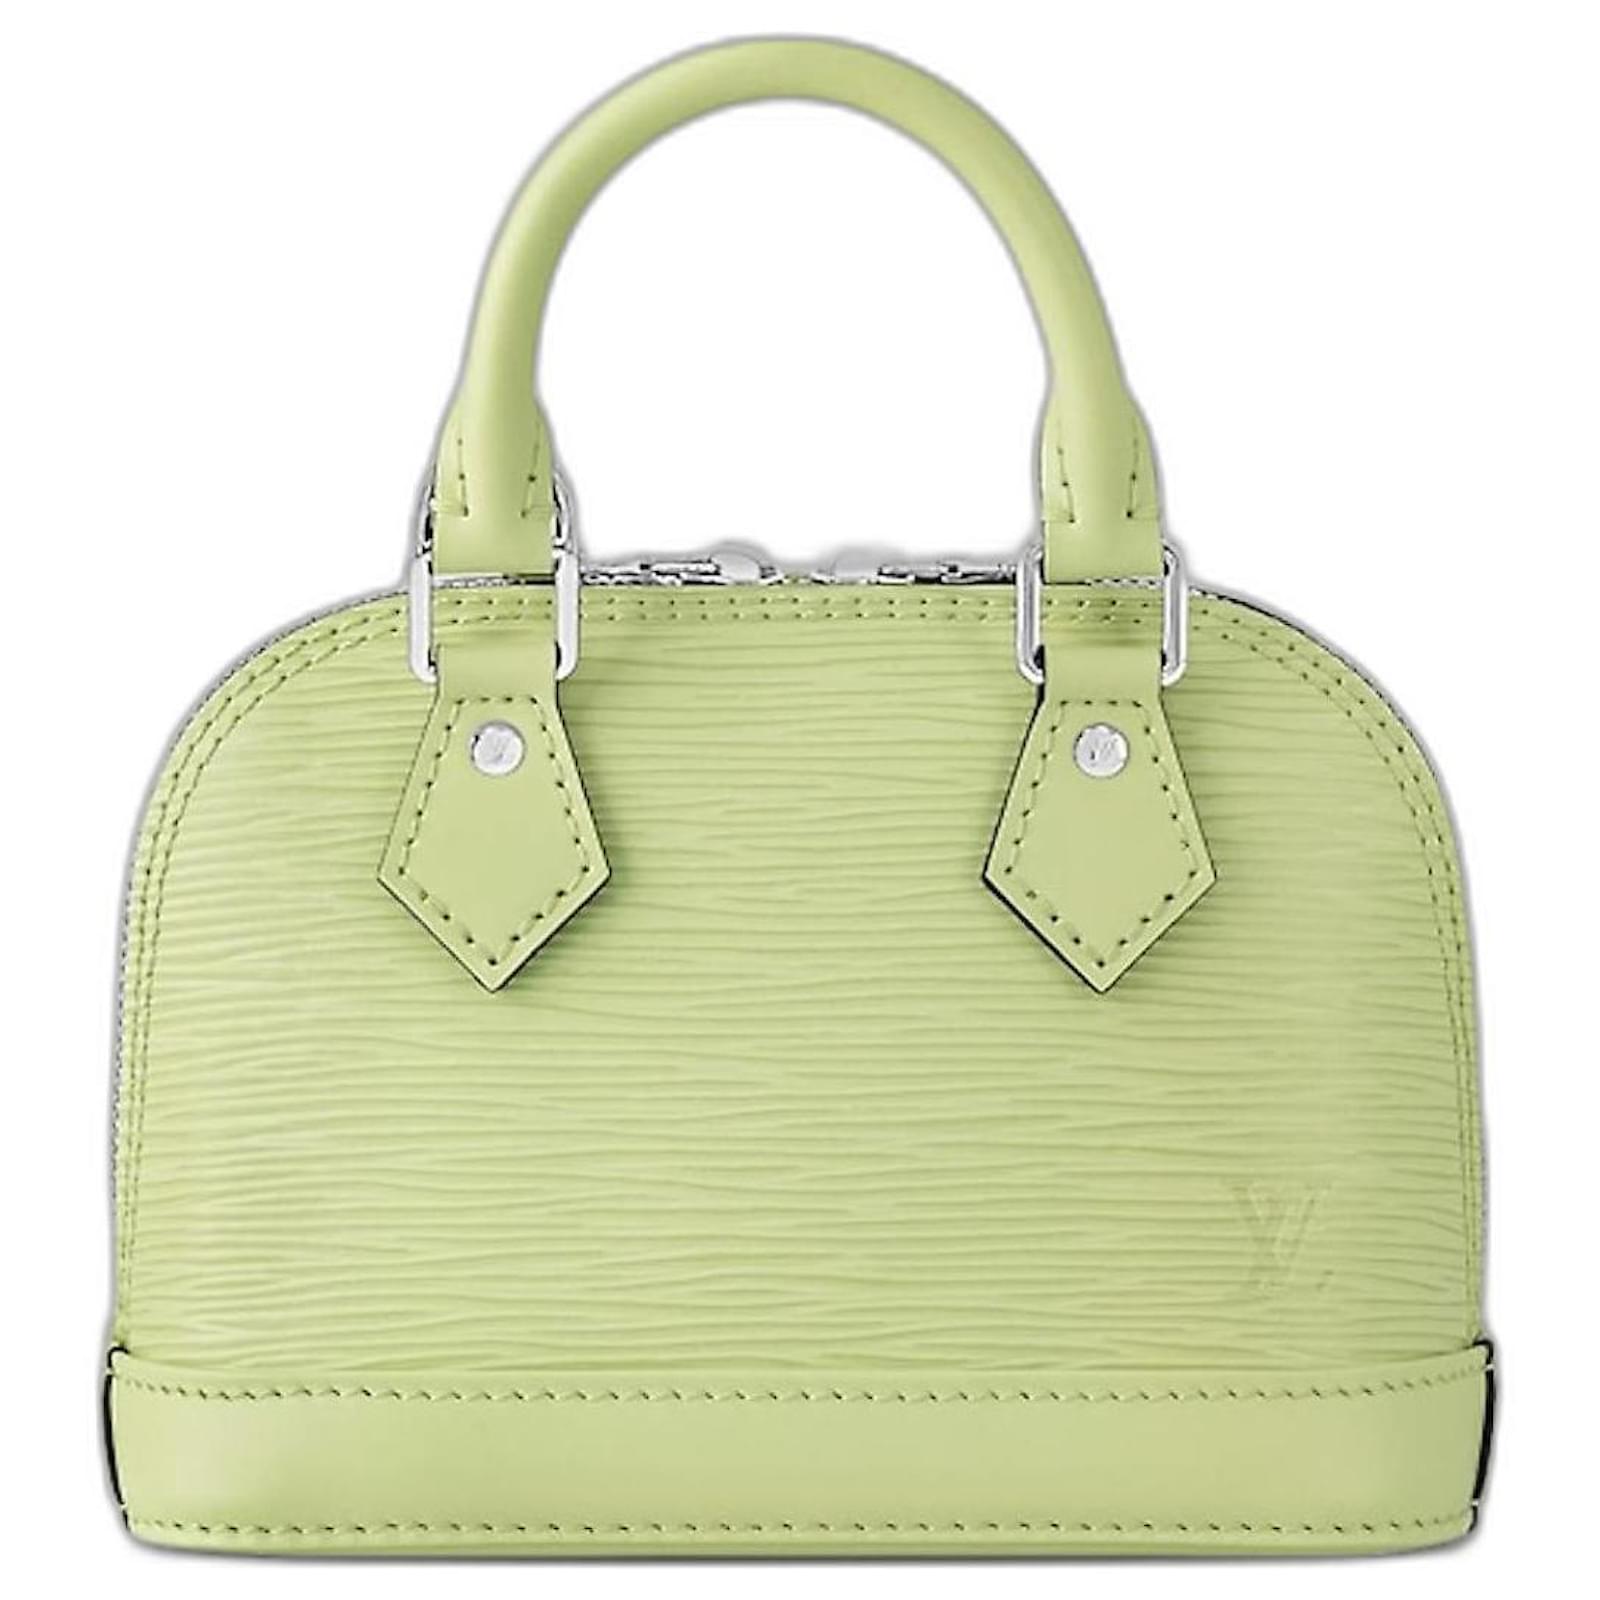 green and white louis vuittons handbags